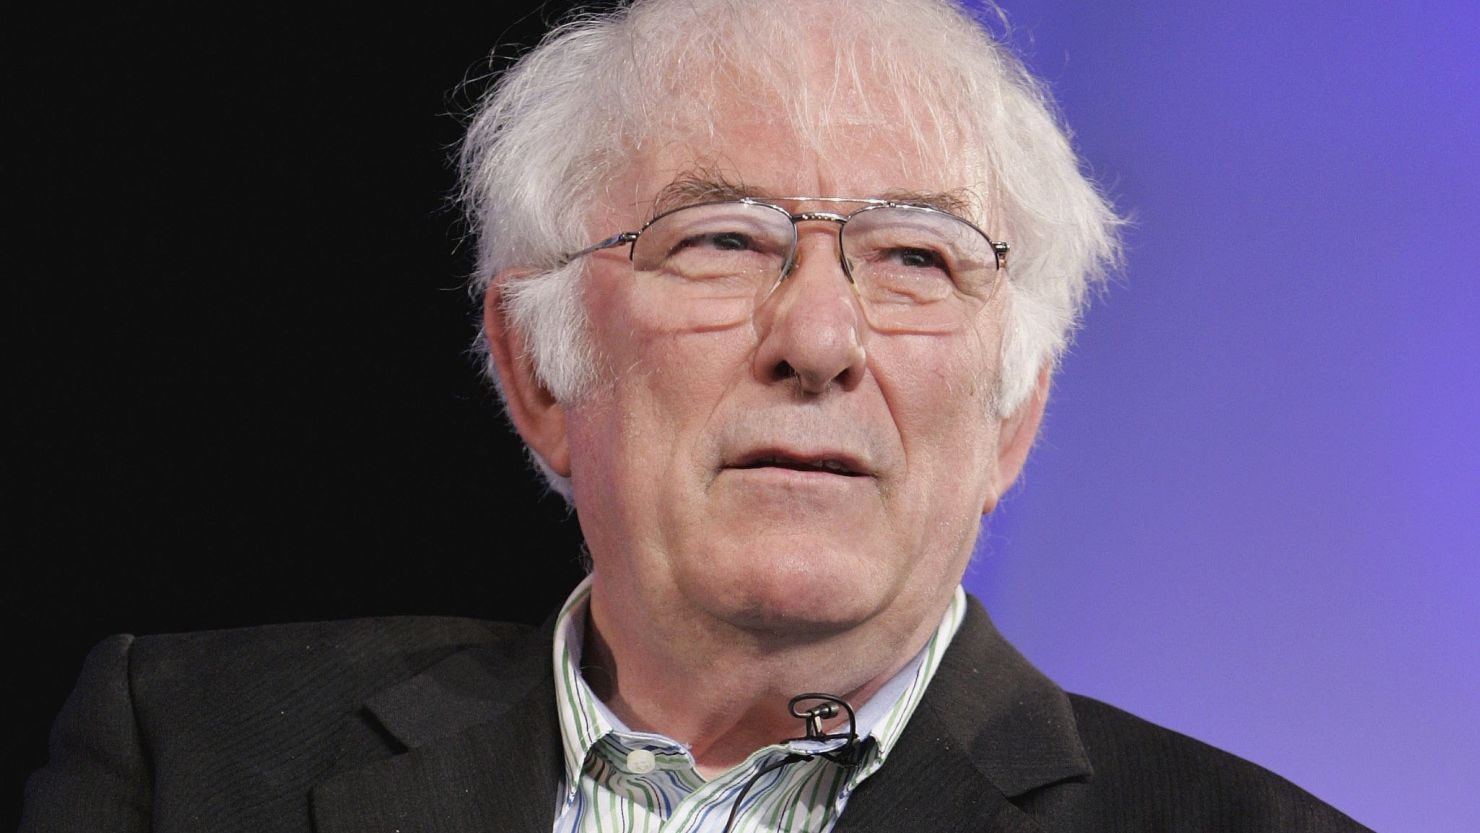  	HAY-ON-WYE, UNITED KINGDOM - MAY 29: Poet Seamus Heaney reads from his new book of poetry, District and Circle, at the Guardian Hay Festival on May 29, 2006 in Hay-On-Wye, England. (Photo by Chris Jackson/Getty Images) 